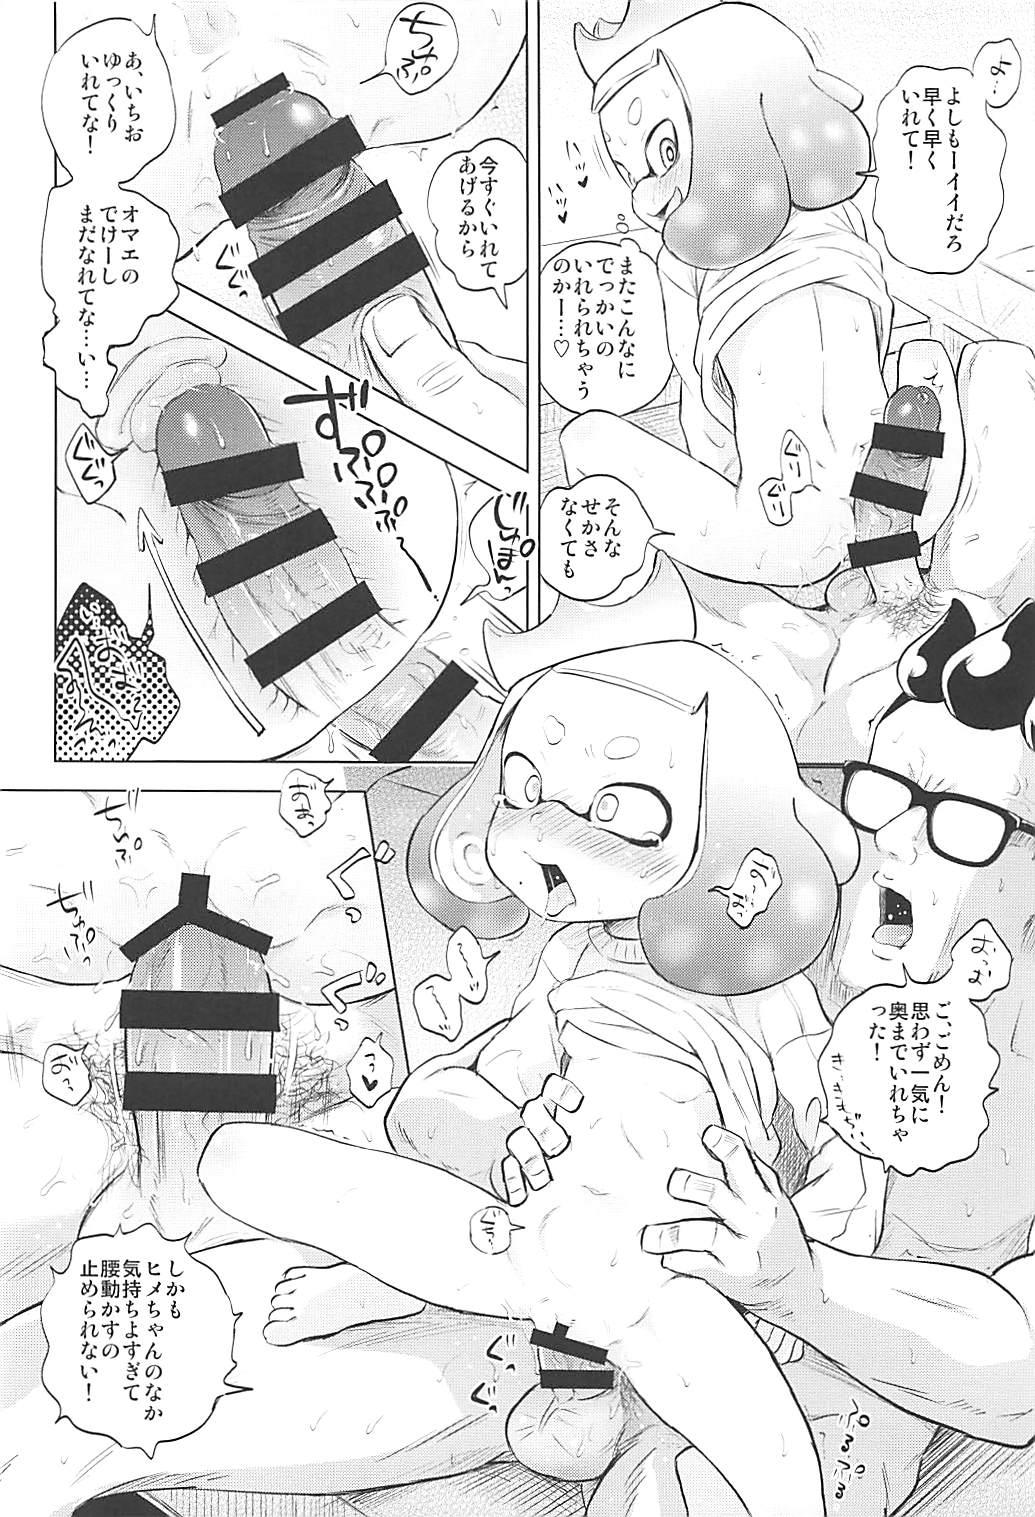 Free 18 Year Old Porn Hime-chan Hitorijime - Splatoon Perfect Body - Page 7